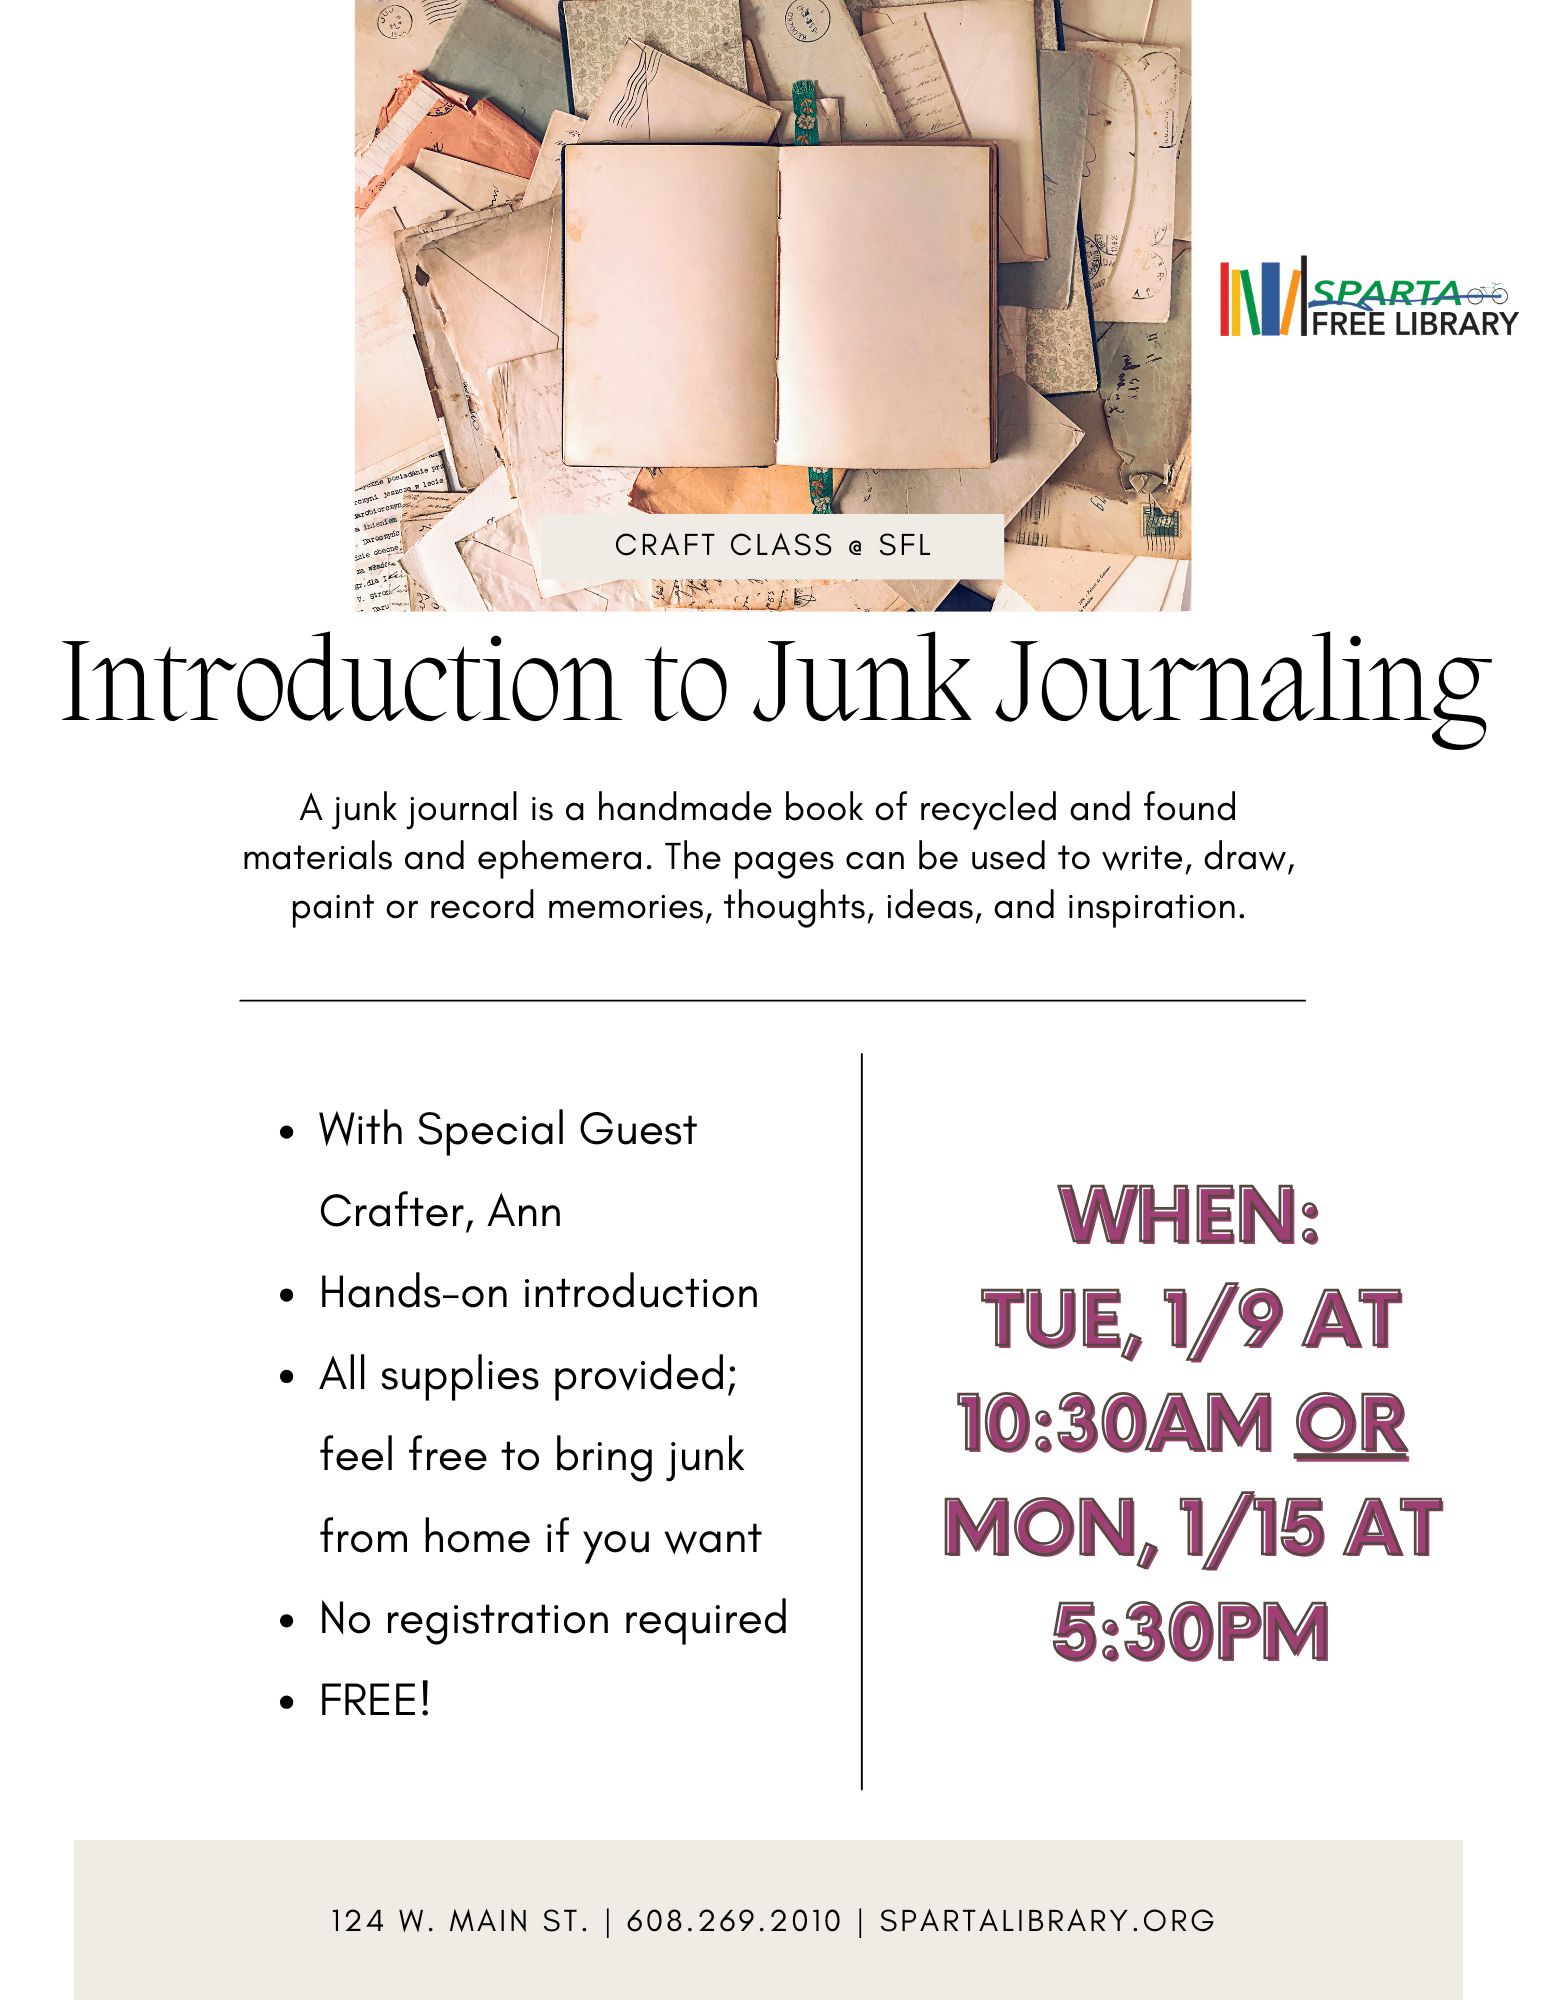 Join the library for this special session of our monthly craft class for adults. Special guest, Ann, will be leading a hands-on introduction to junk journaling. All supplies will be provided, but please feel free to bring some junk from home that you'd like to incorporate. No registration required. </p>
<p>A junk journal is a handmade book of recycled and found materials and ephemera. The pages can be used to write, draw, paint or record memories, thoughts, ideas, and inspiration.